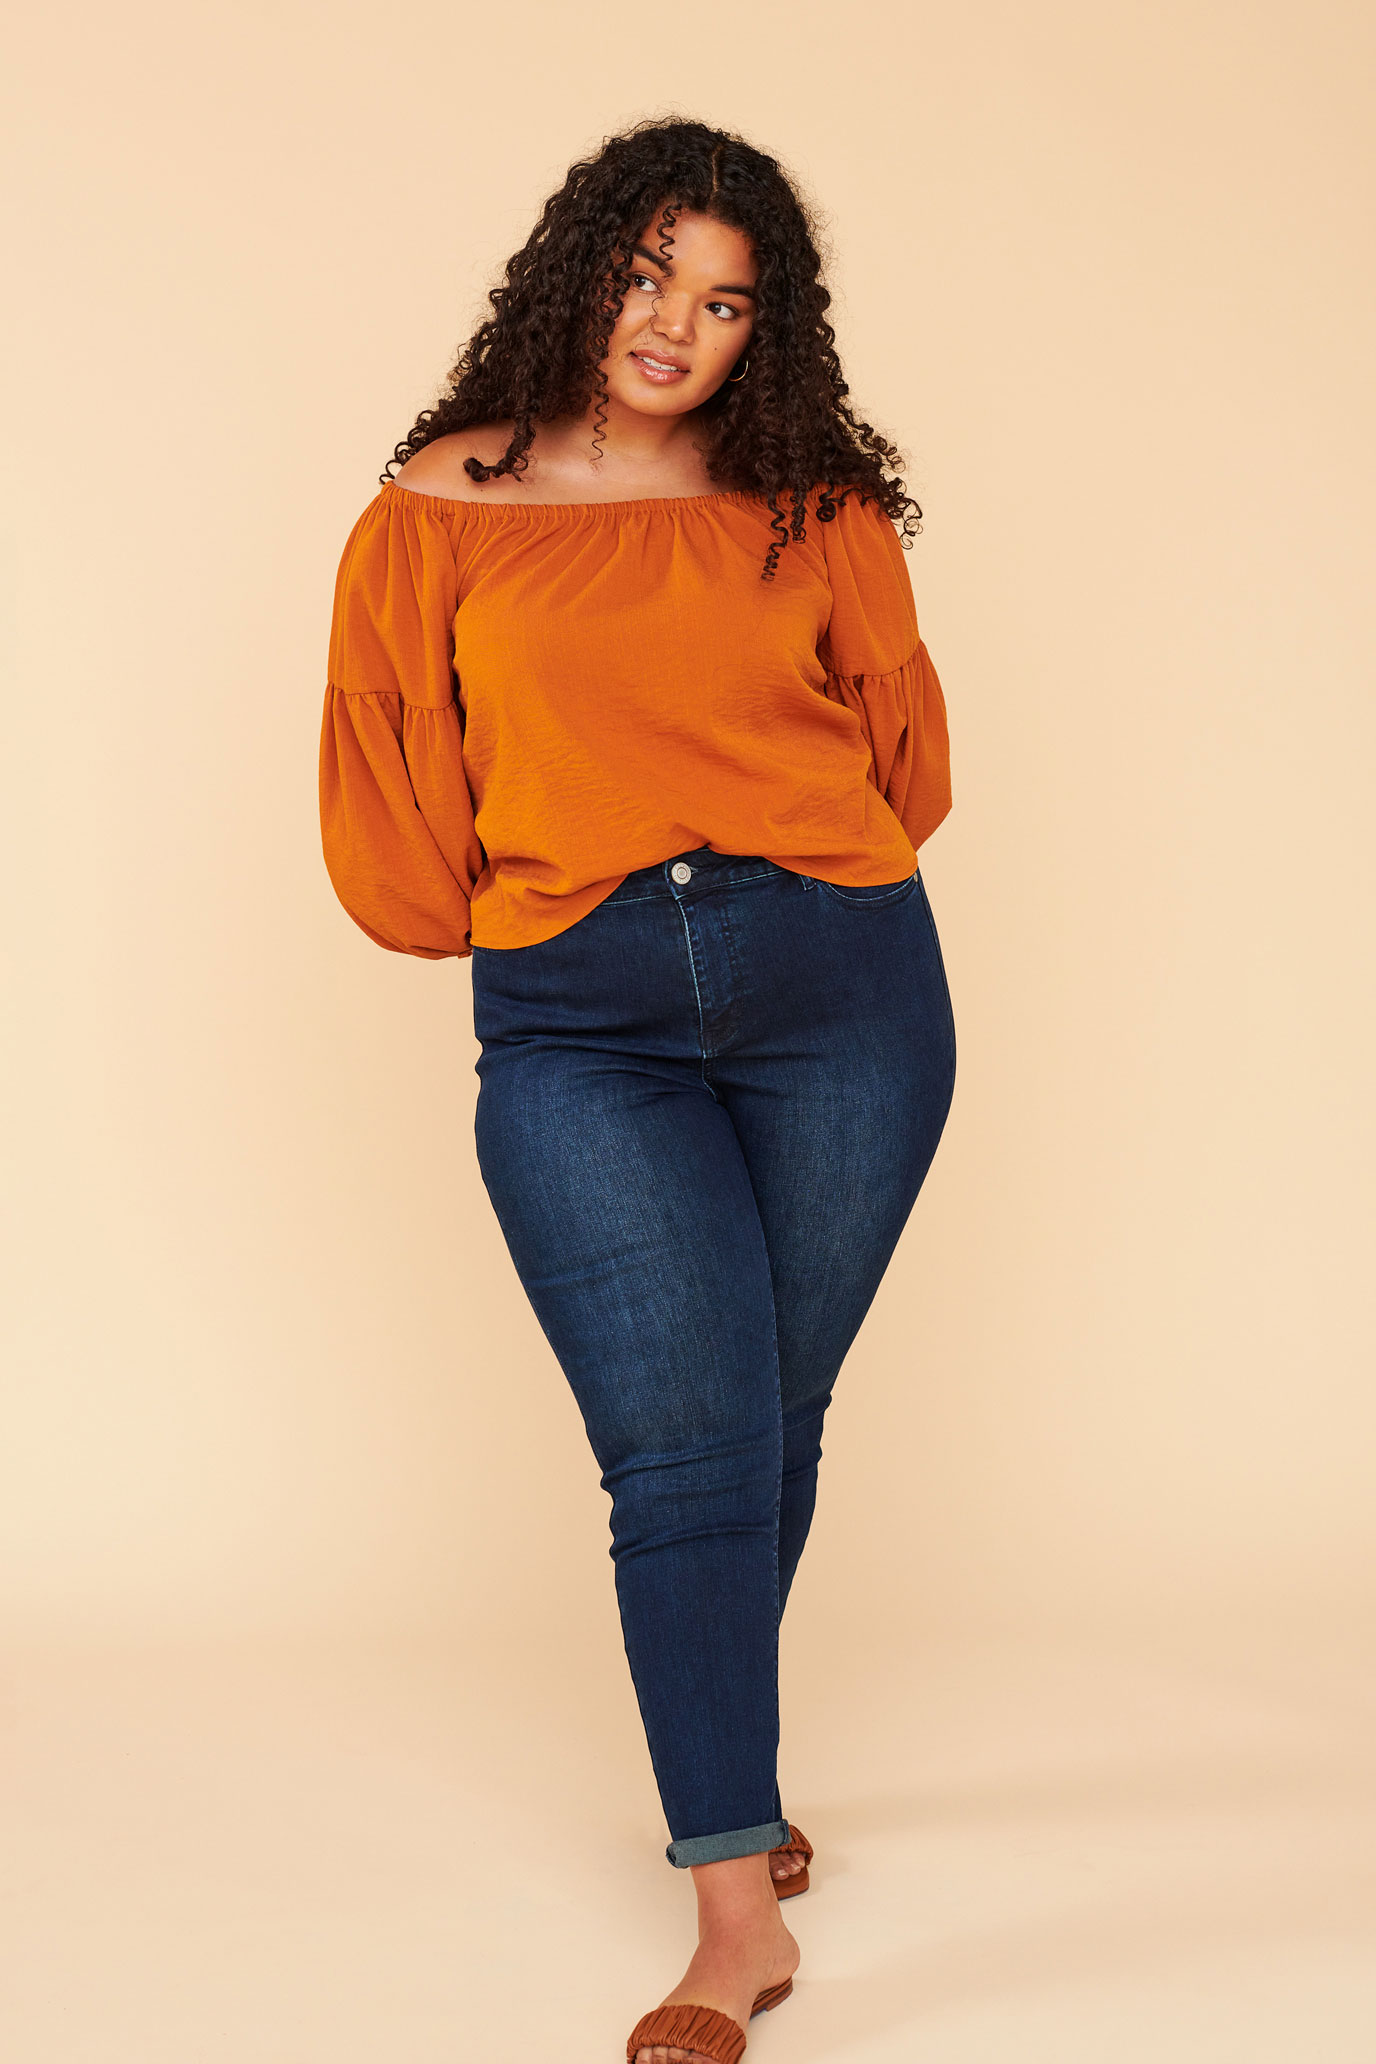 Woman wearing orange top, jeans and sandals